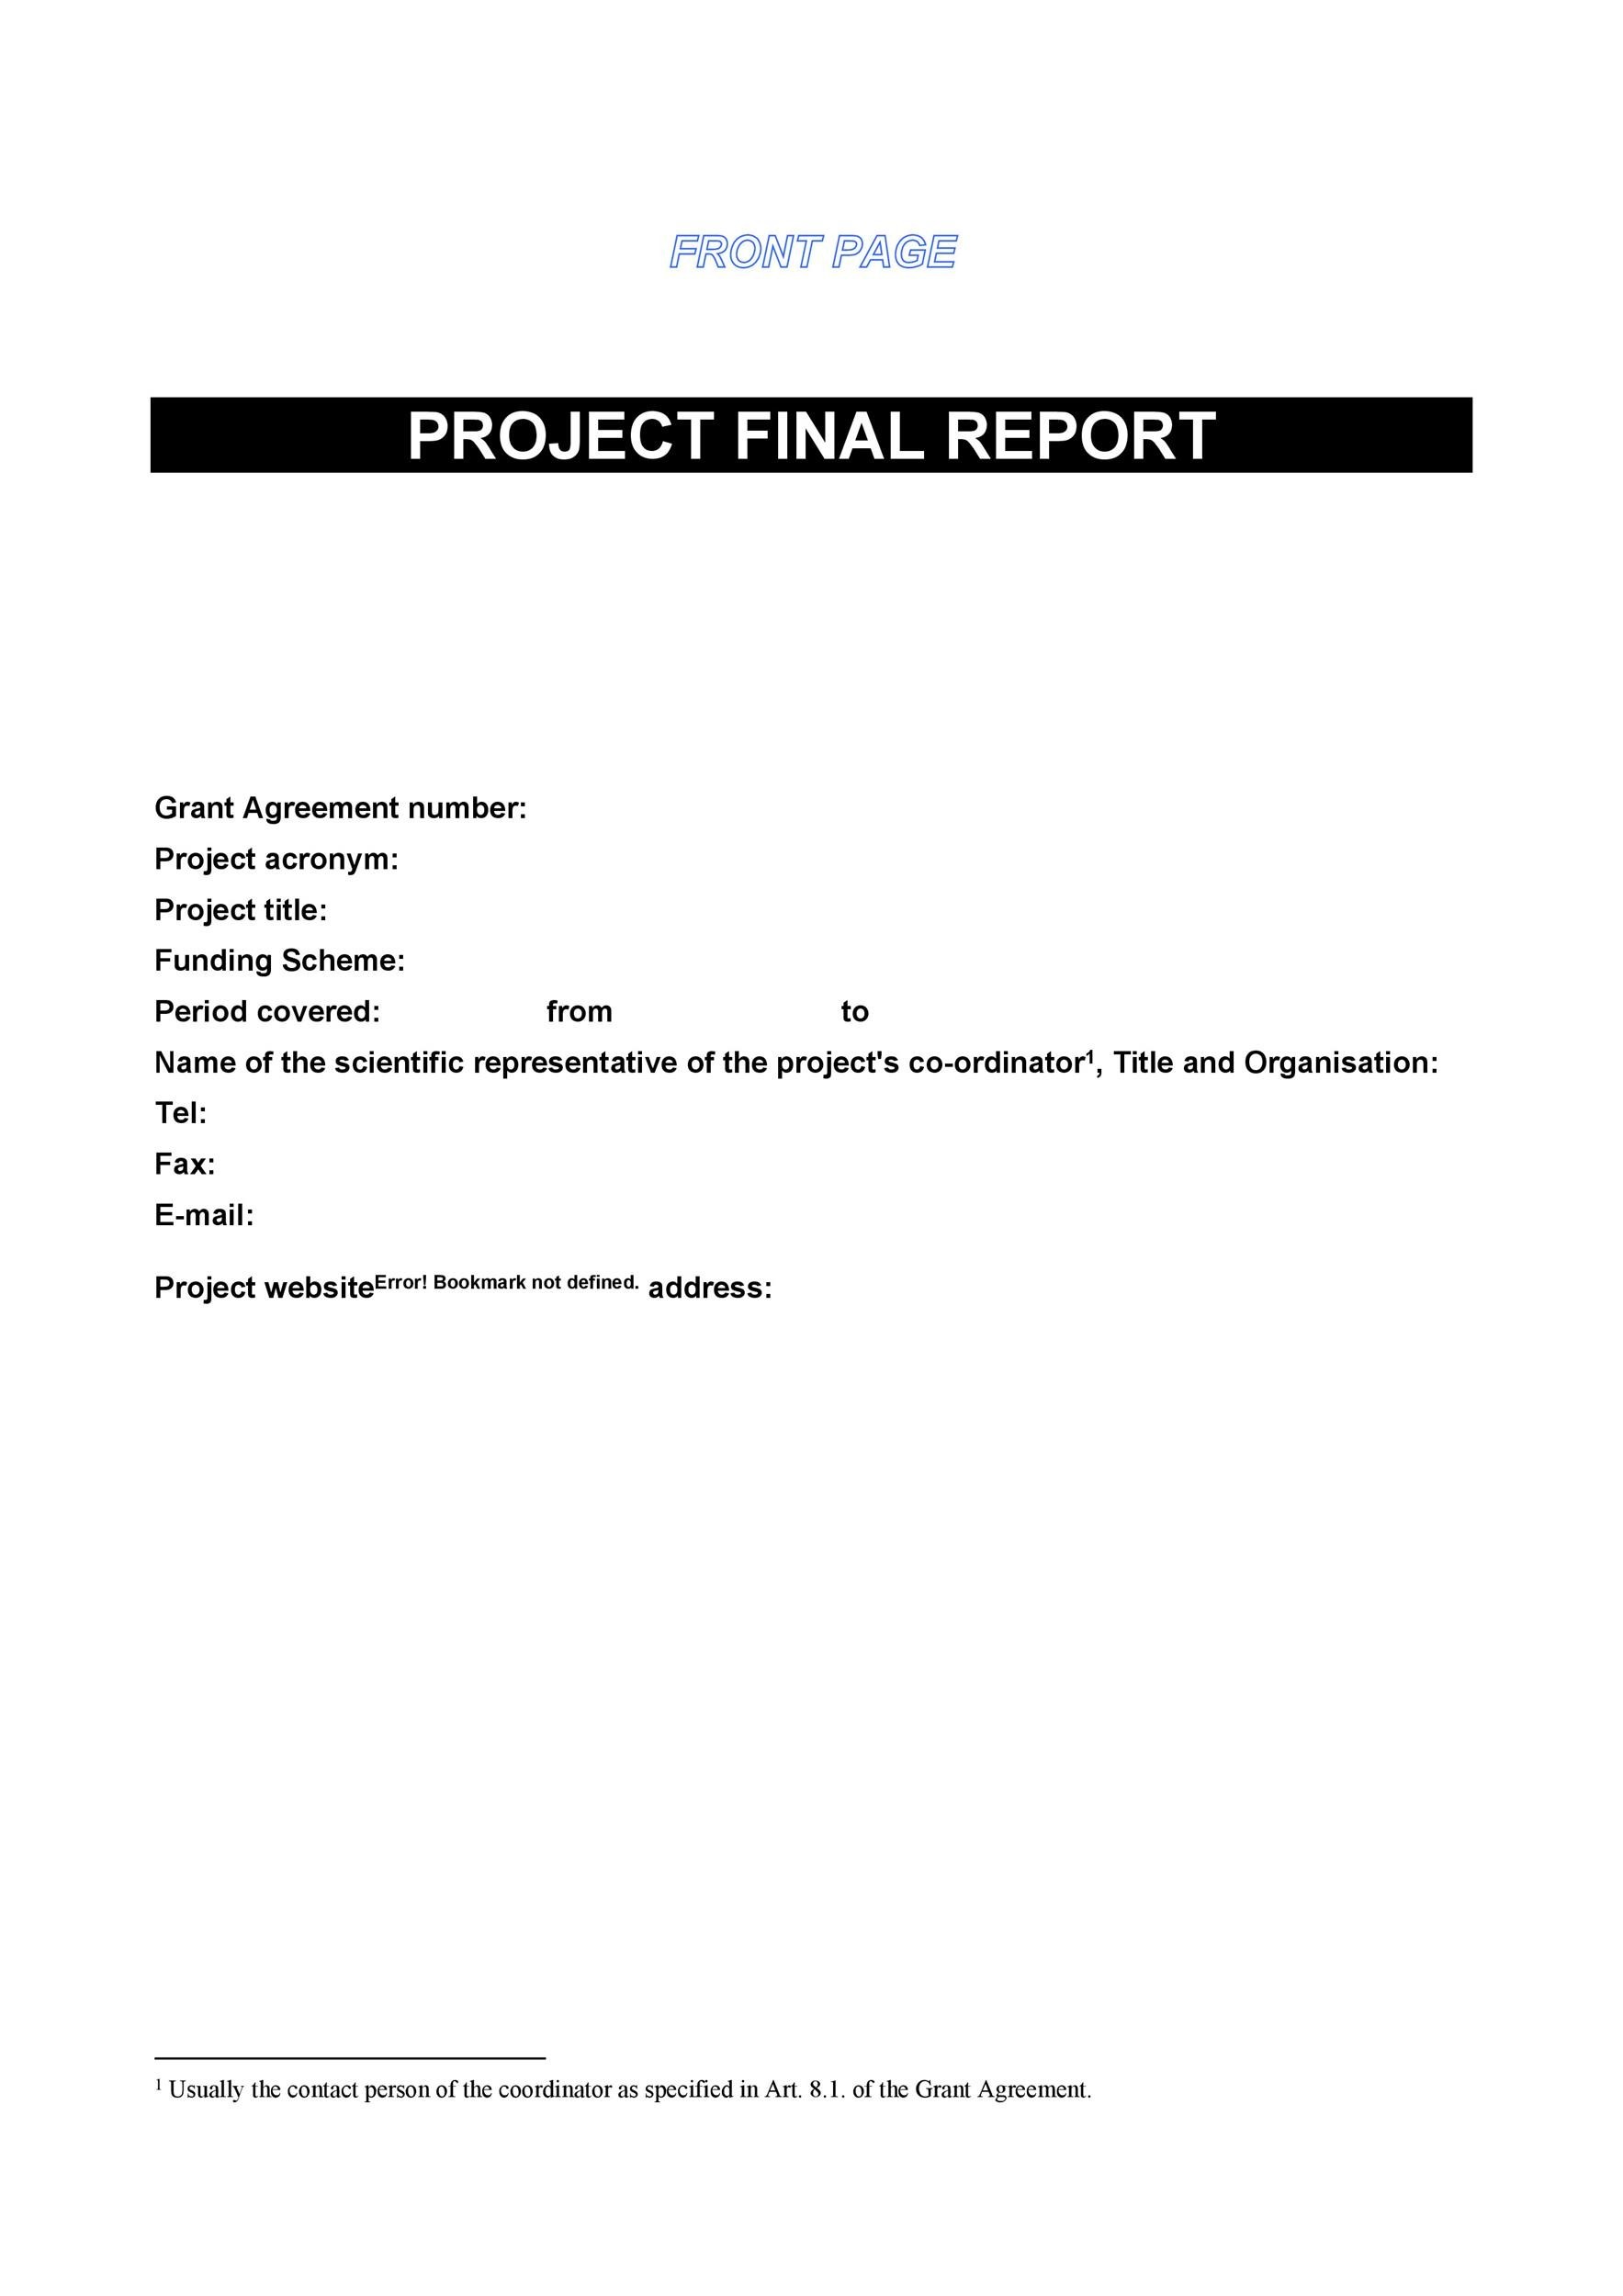 Report Cover Sheet Template from templatelab.com